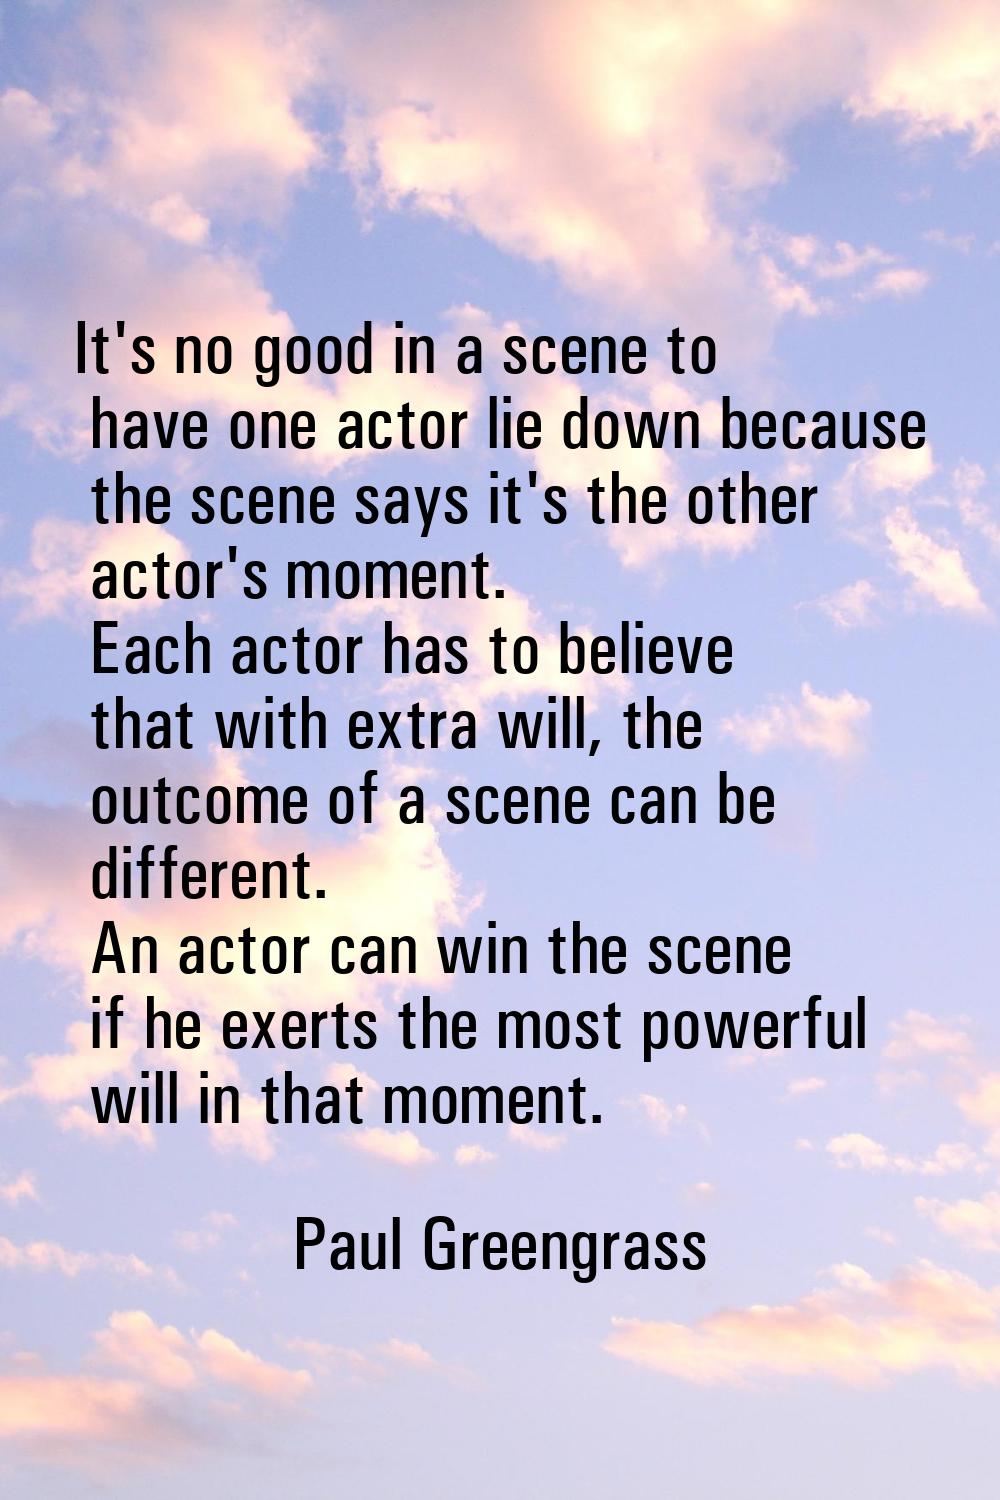 It's no good in a scene to have one actor lie down because the scene says it's the other actor's mo